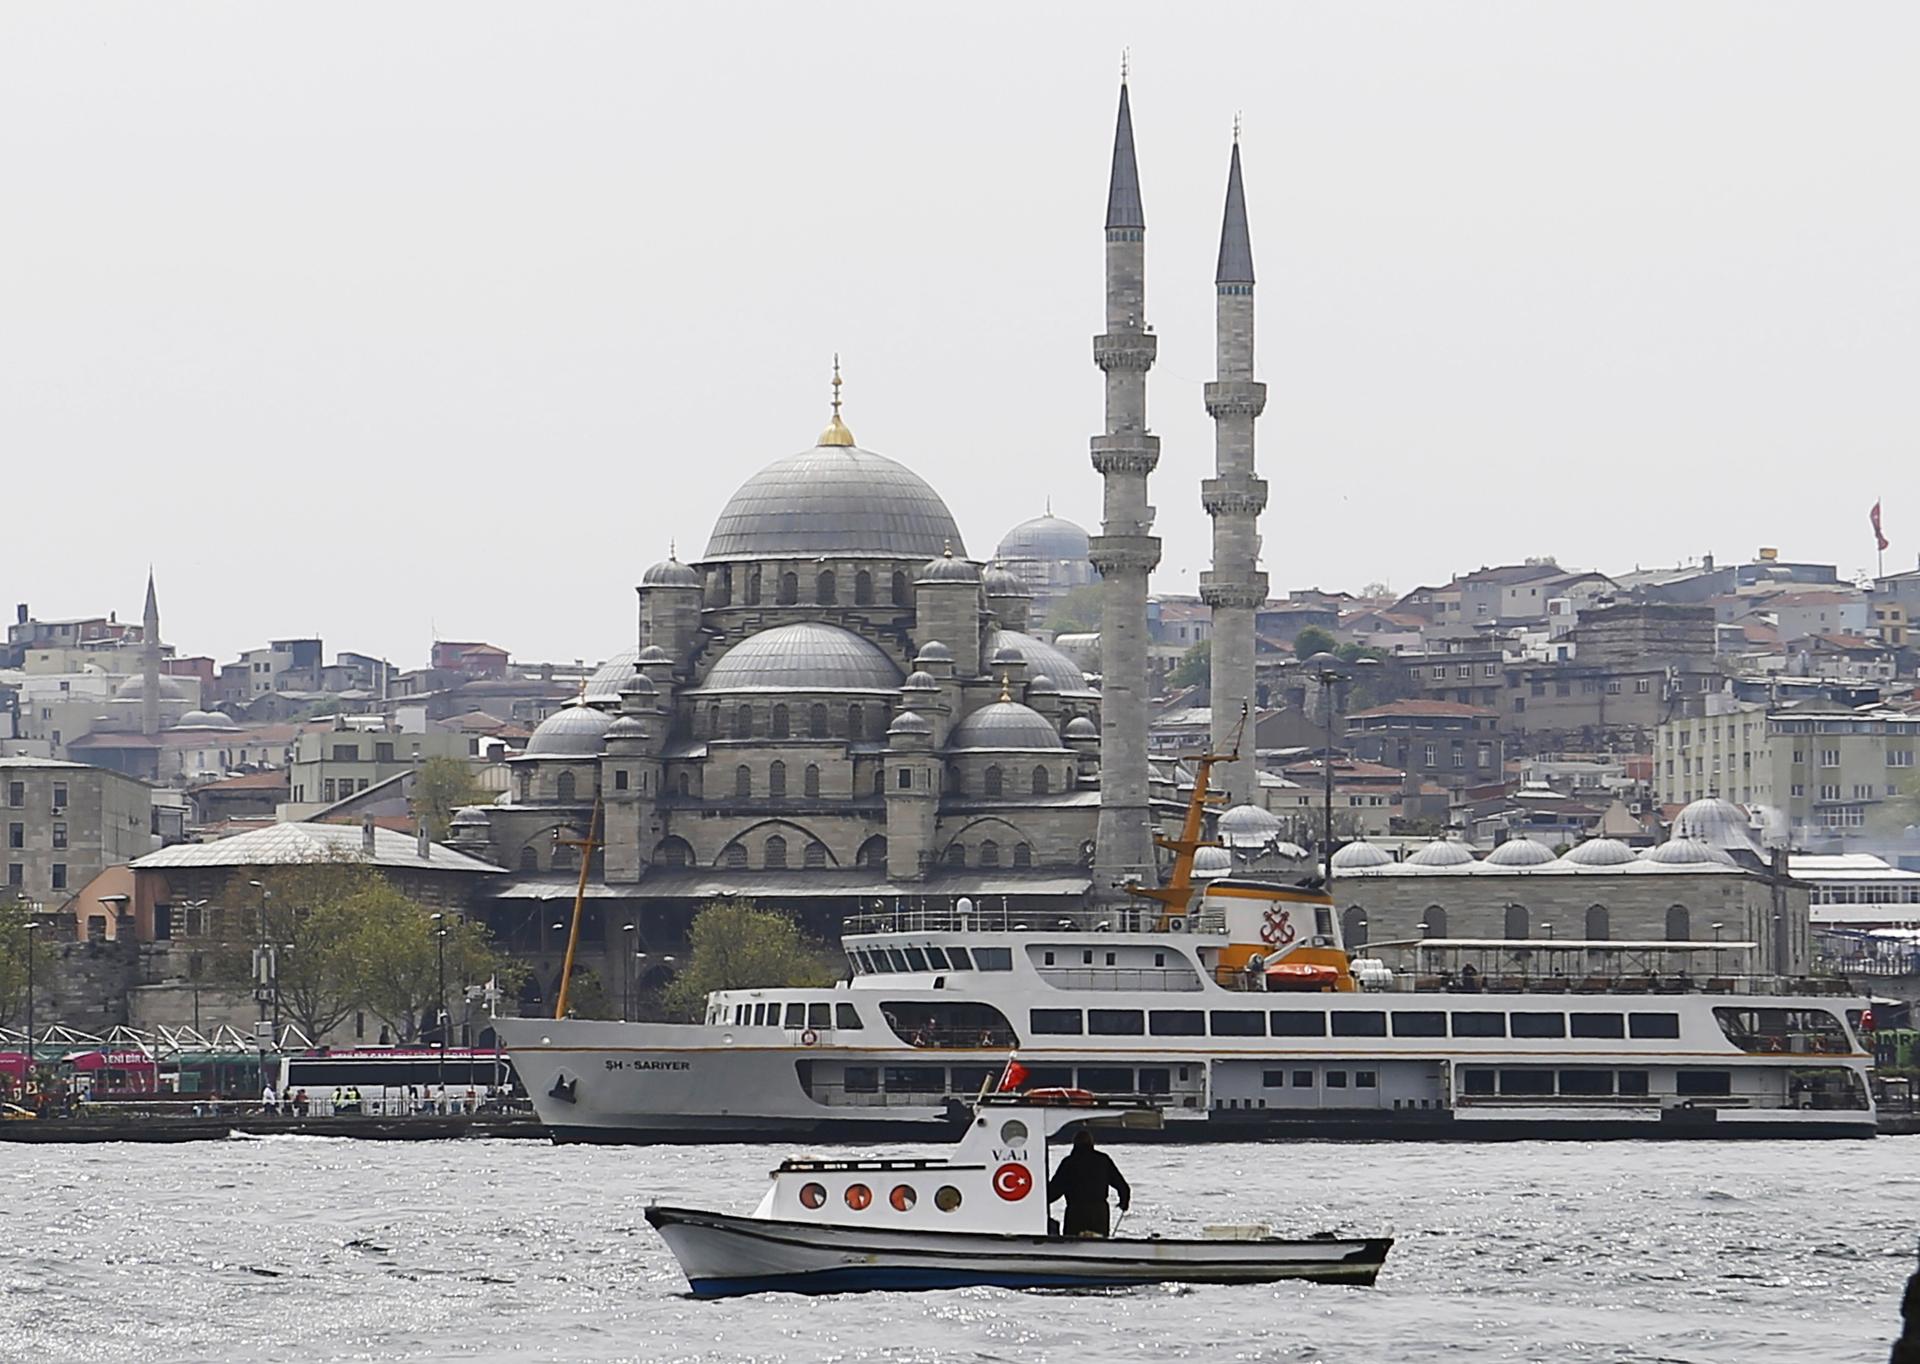 A fishing boat sails in the Golden Horn with the 17th-century Yeni Cami mosque in the background in Istanbul, Turkey.